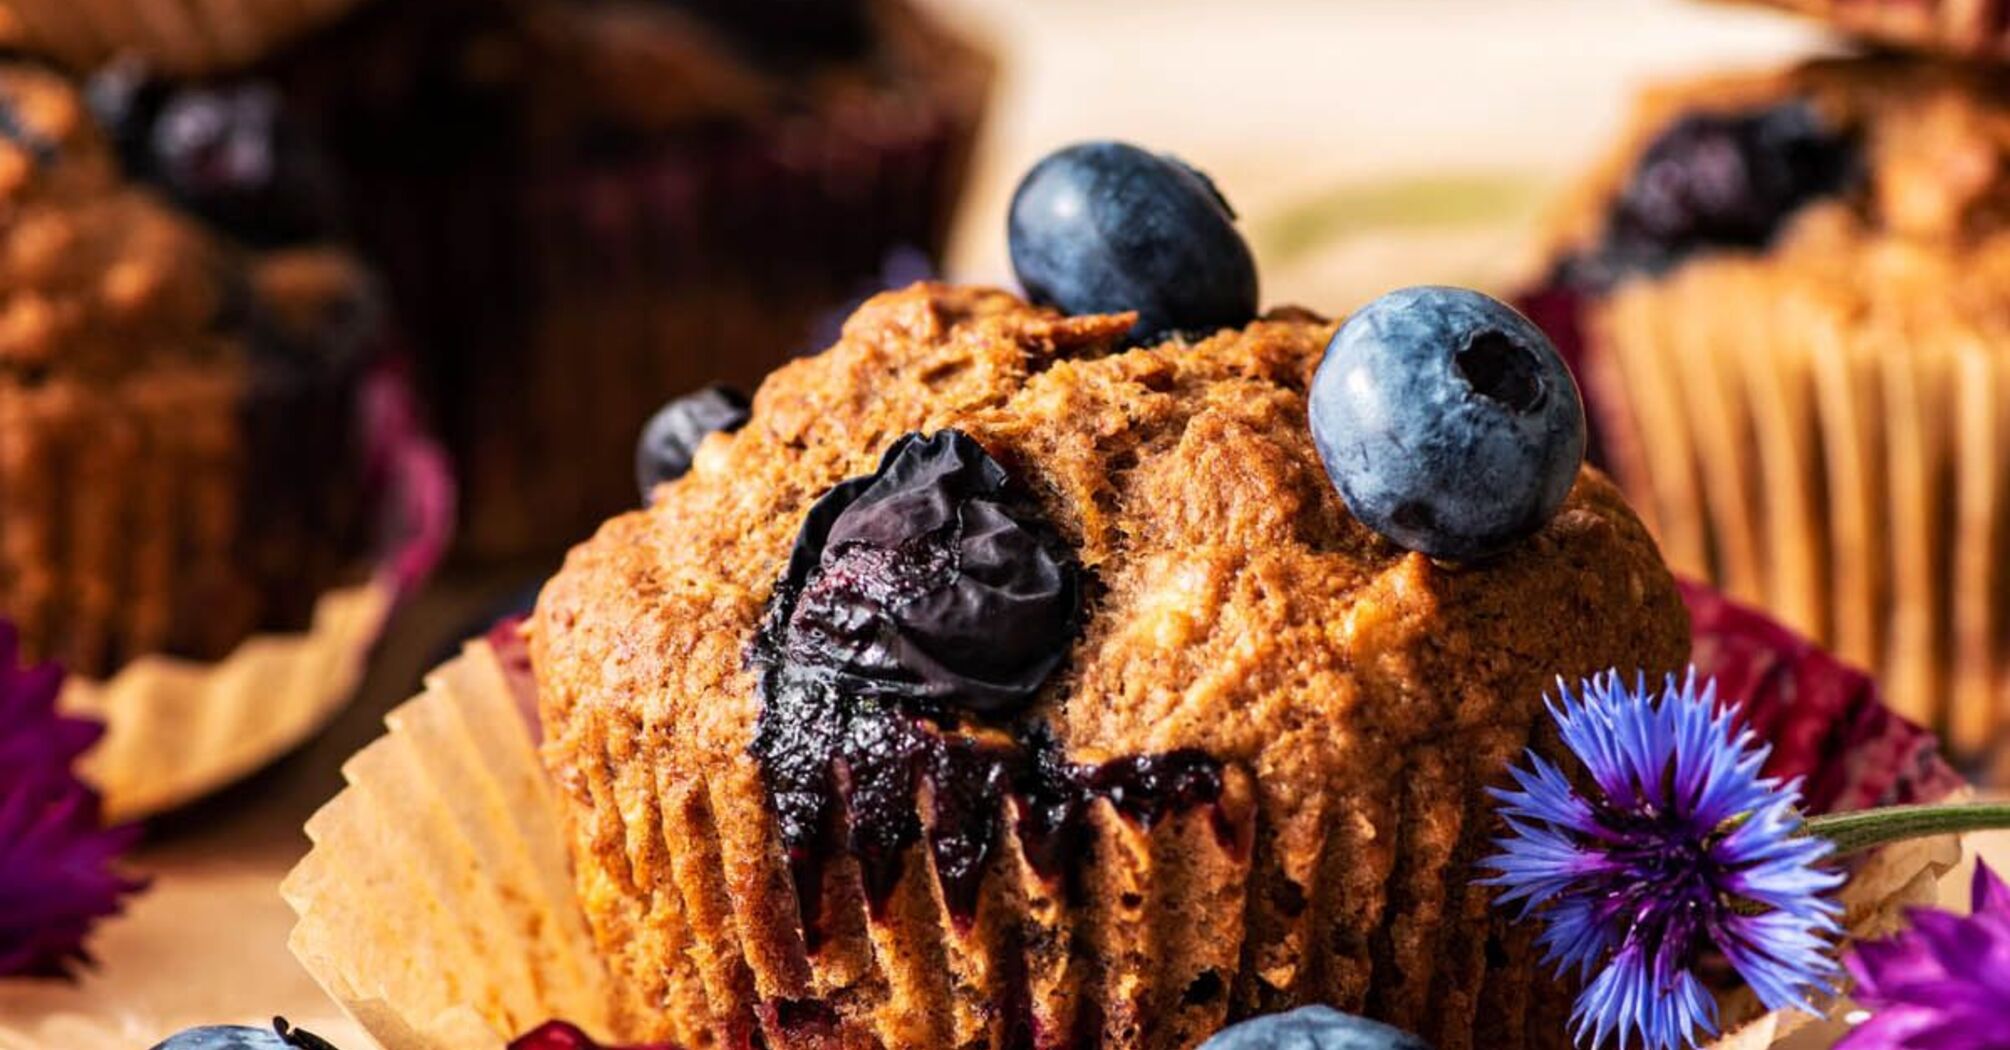 How to cook banana blueberry muffins